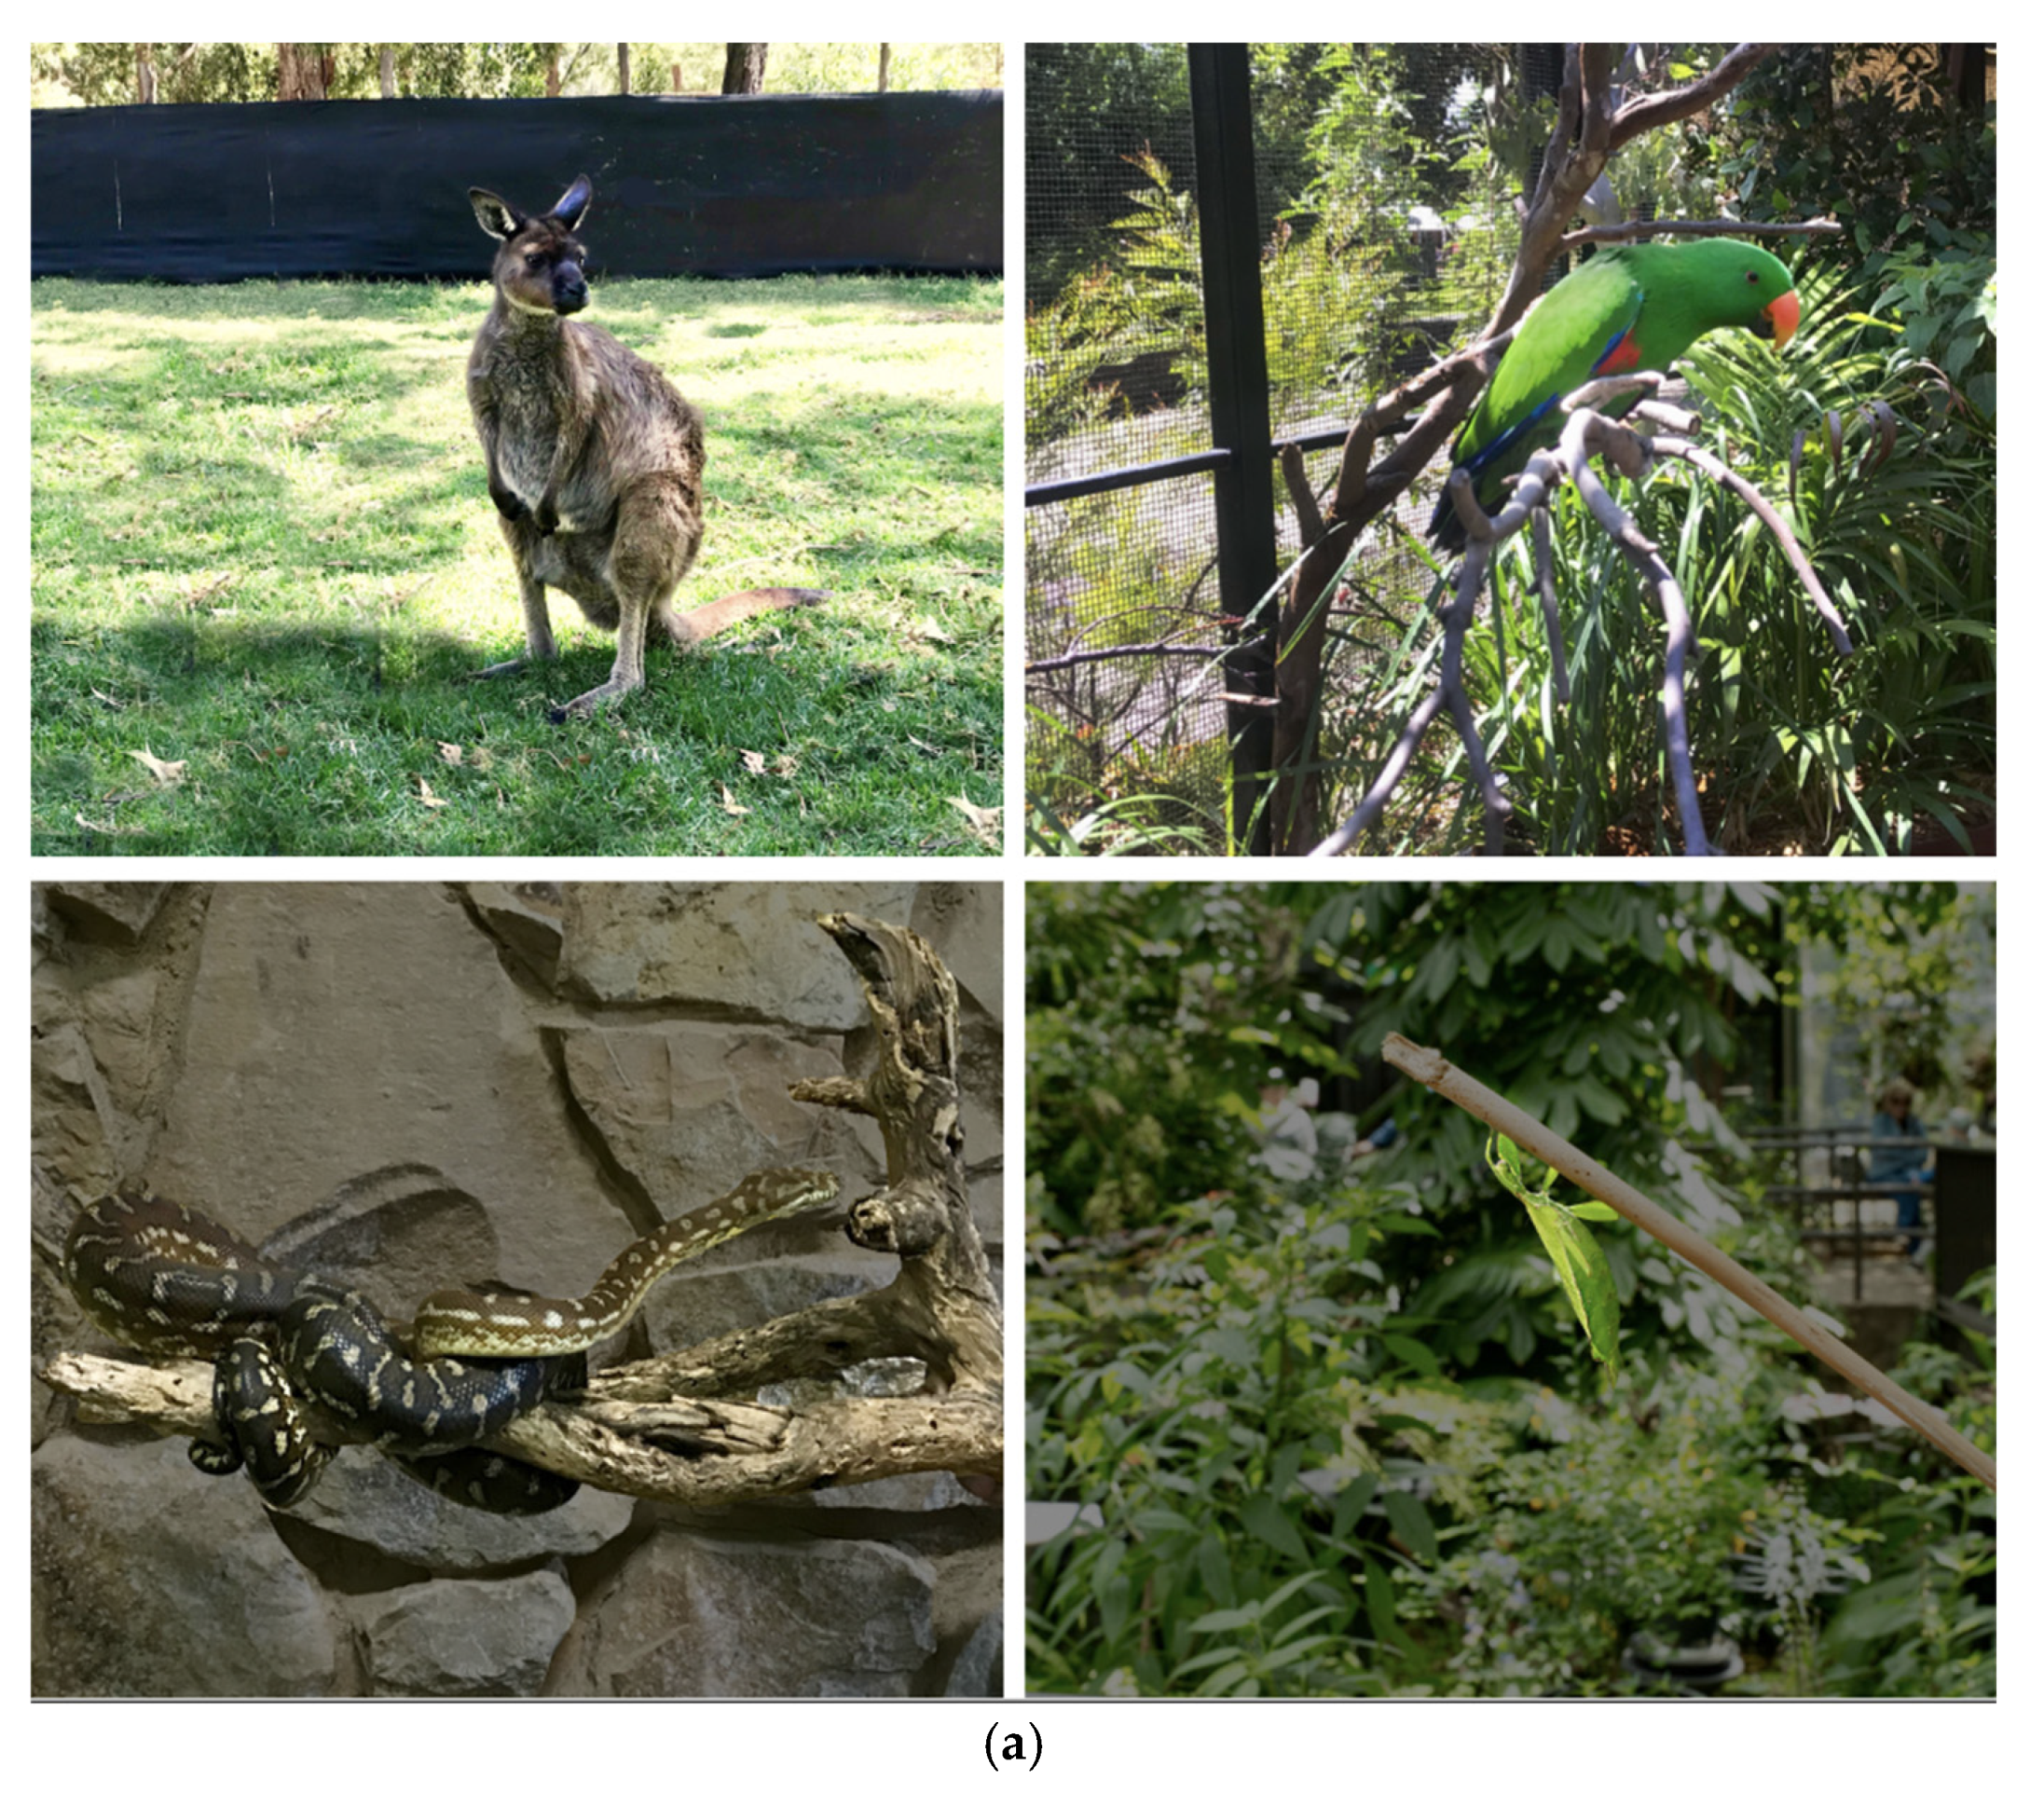 Animals | Free Full-Text | Human Positioning in Close-Encounter Photographs  and the Effect on Public Perceptions of Zoo Animals